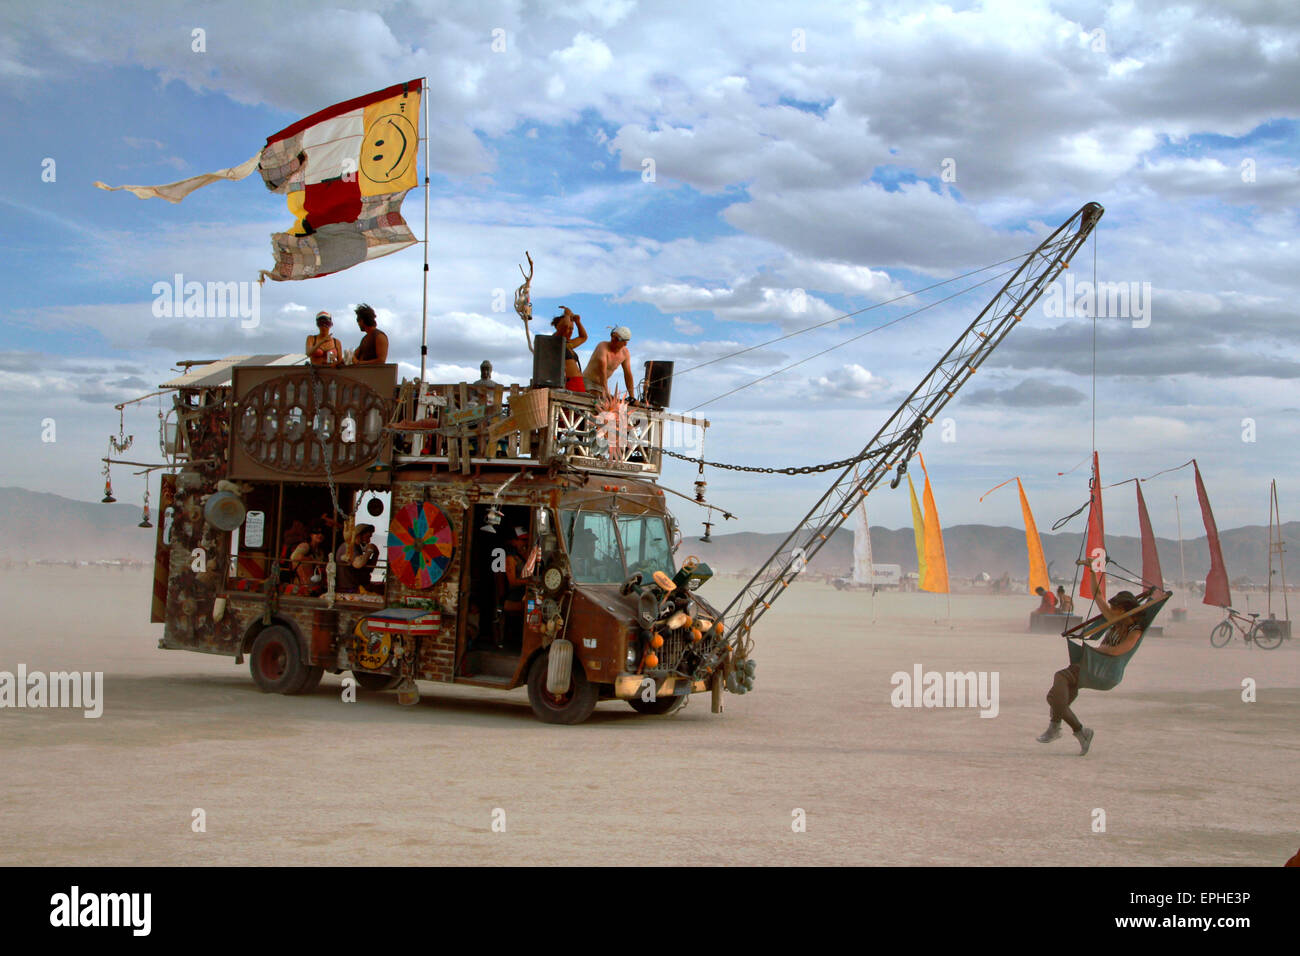 An art installation vehicle drives through the desert during the annual Burning Man festival in the desert August 30, 2014 in Black Rock City, Nevada. Stock Photo